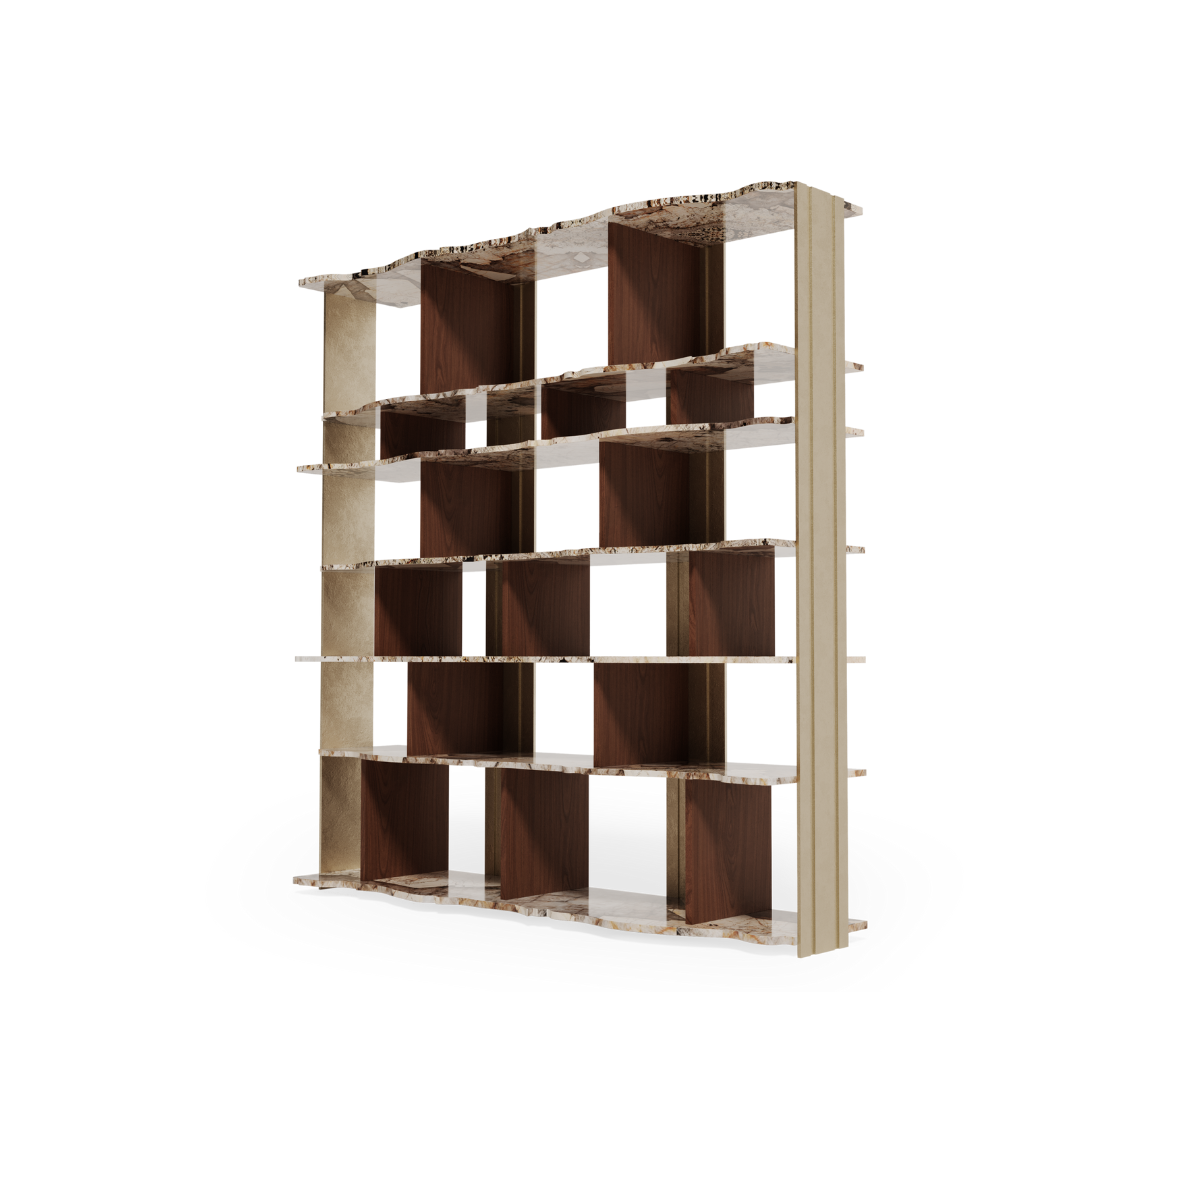 CARRERA BOOKCASE BY COVET COLLECTION